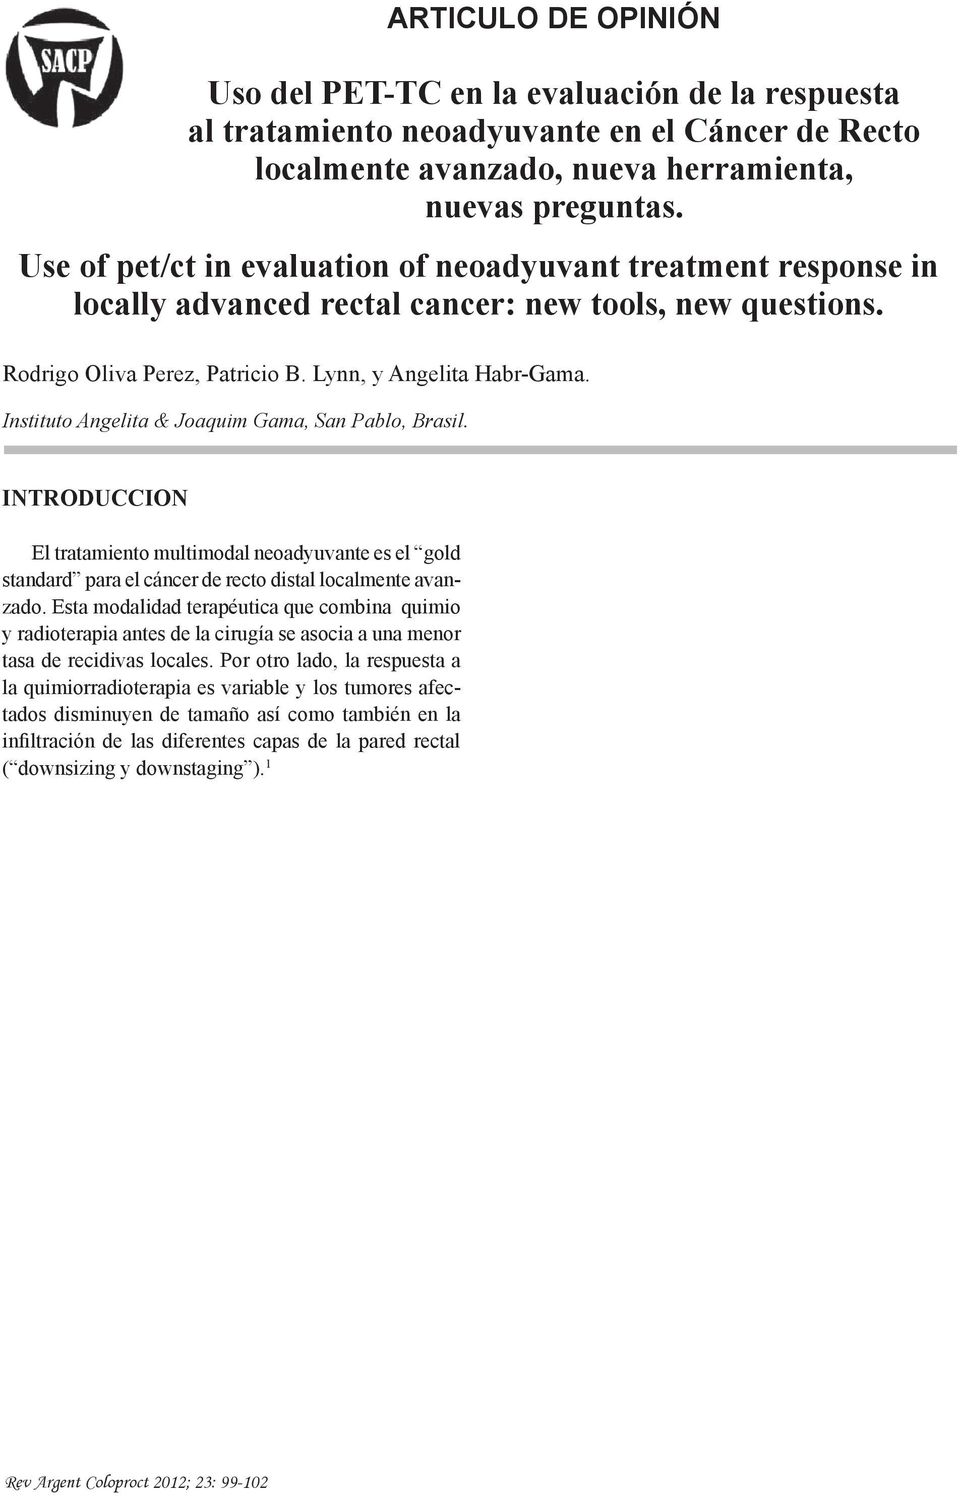 Use of pet/ct in evaluation of neoadyuvant treatment response in locally advanced rectal cancer: new tools, new questions.